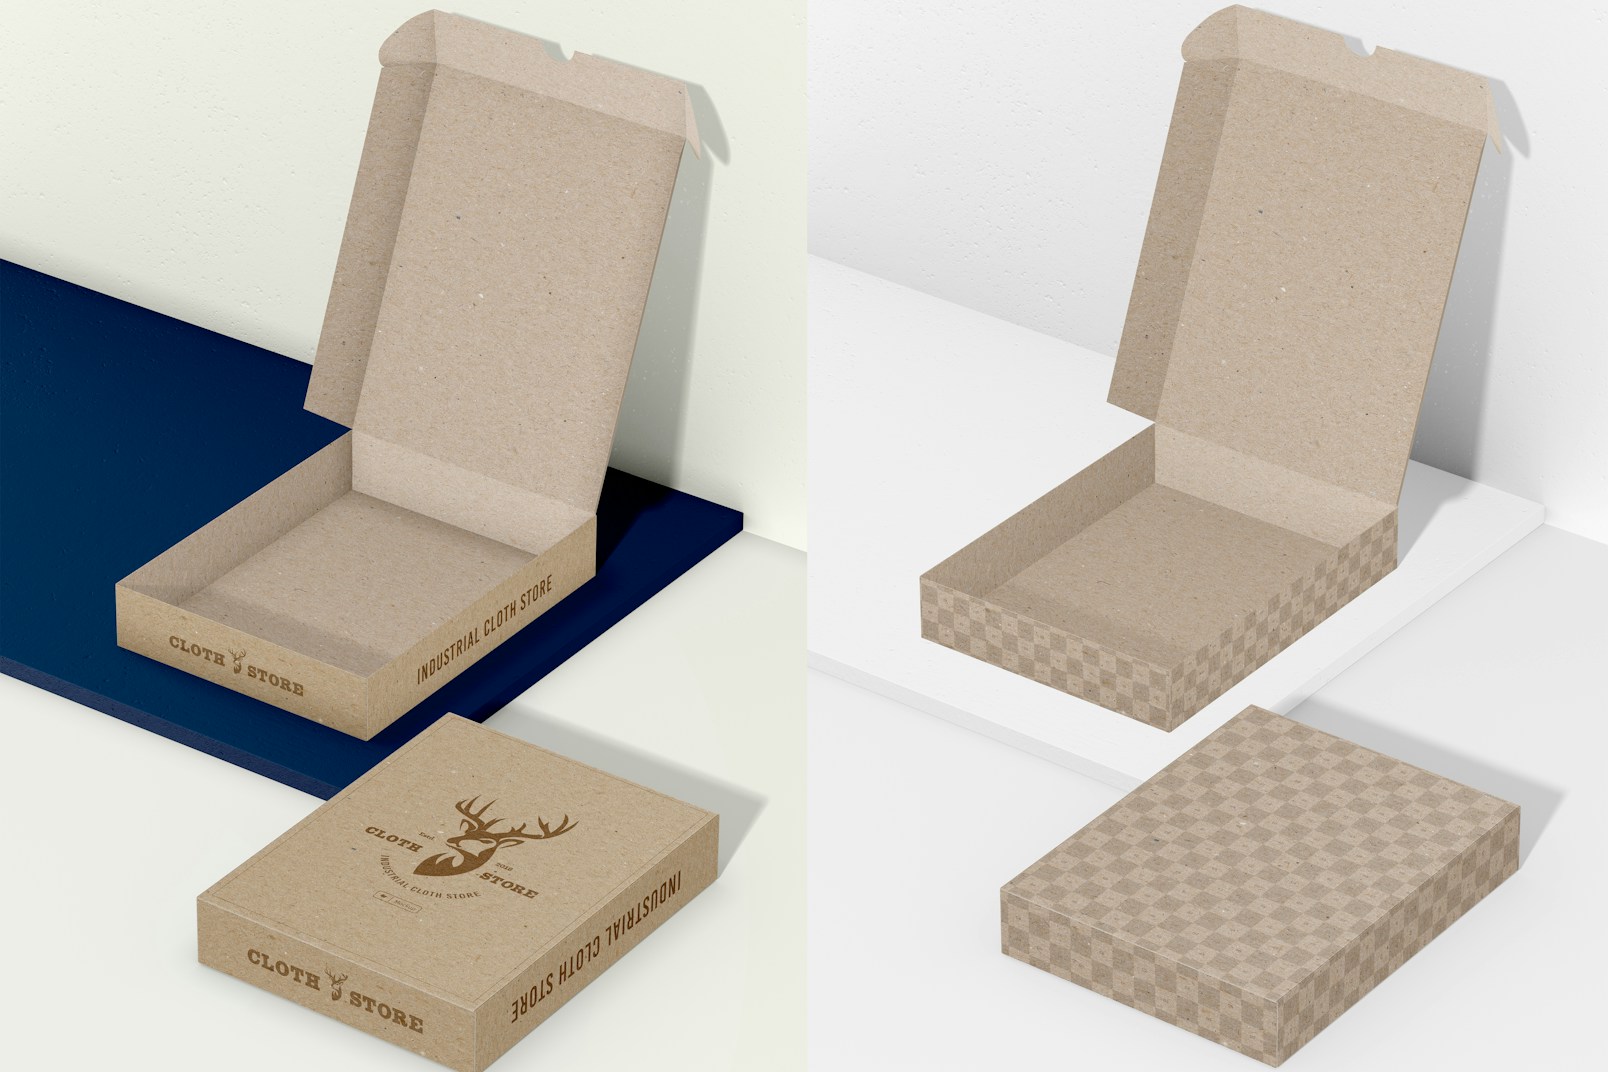 Large Cardboard Boxes Mockup, Opened and Closed